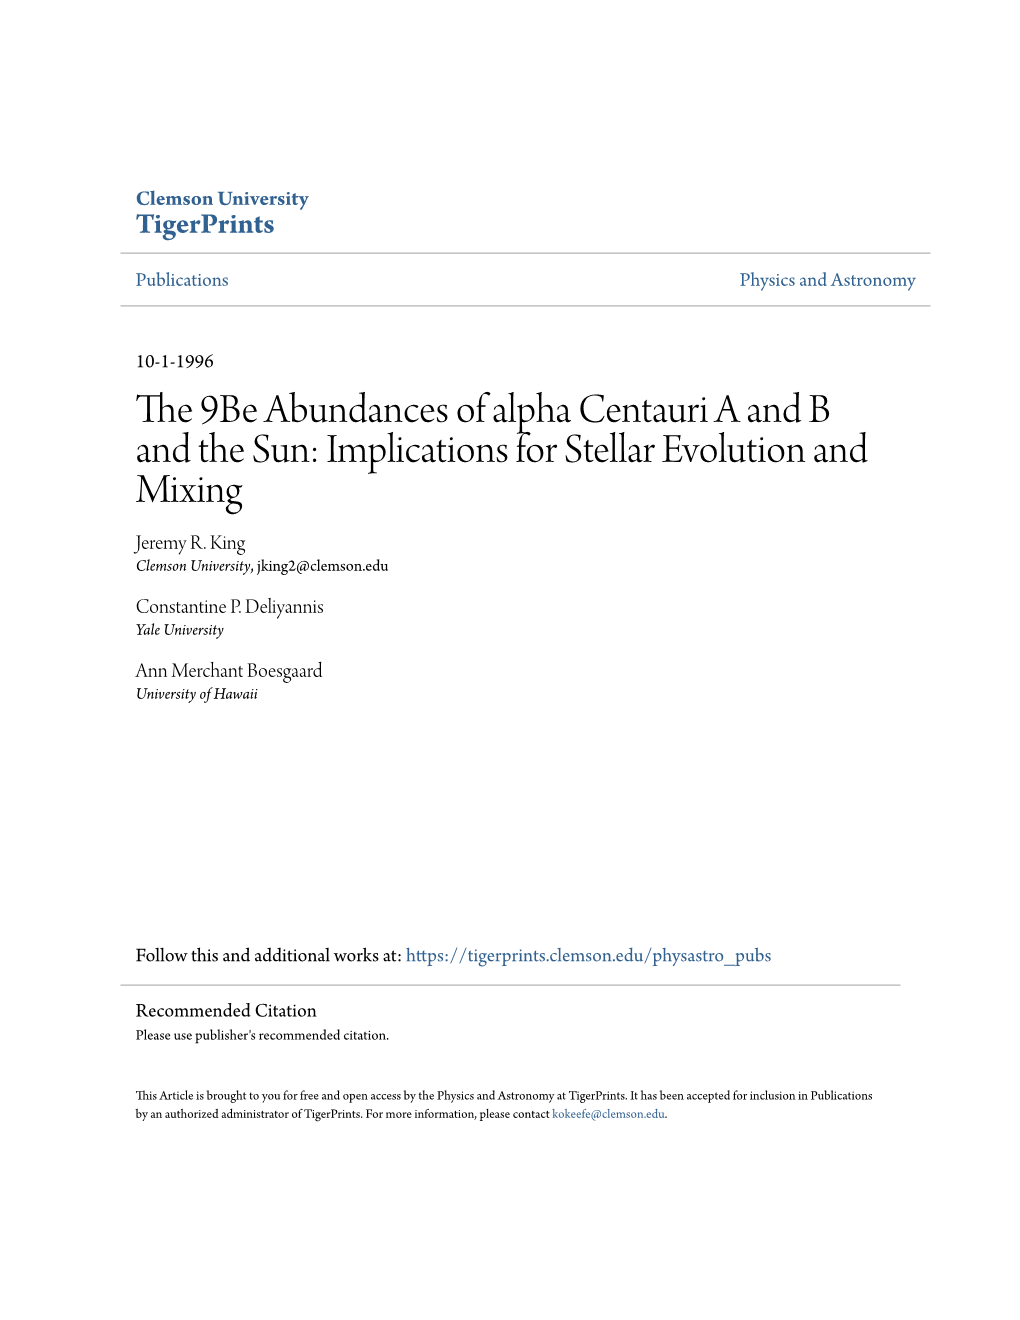 The 9Be Abundances of Alpha Centauri a and B and the Sun: Implications for Stellar Evolution and Mixing Jeremy R